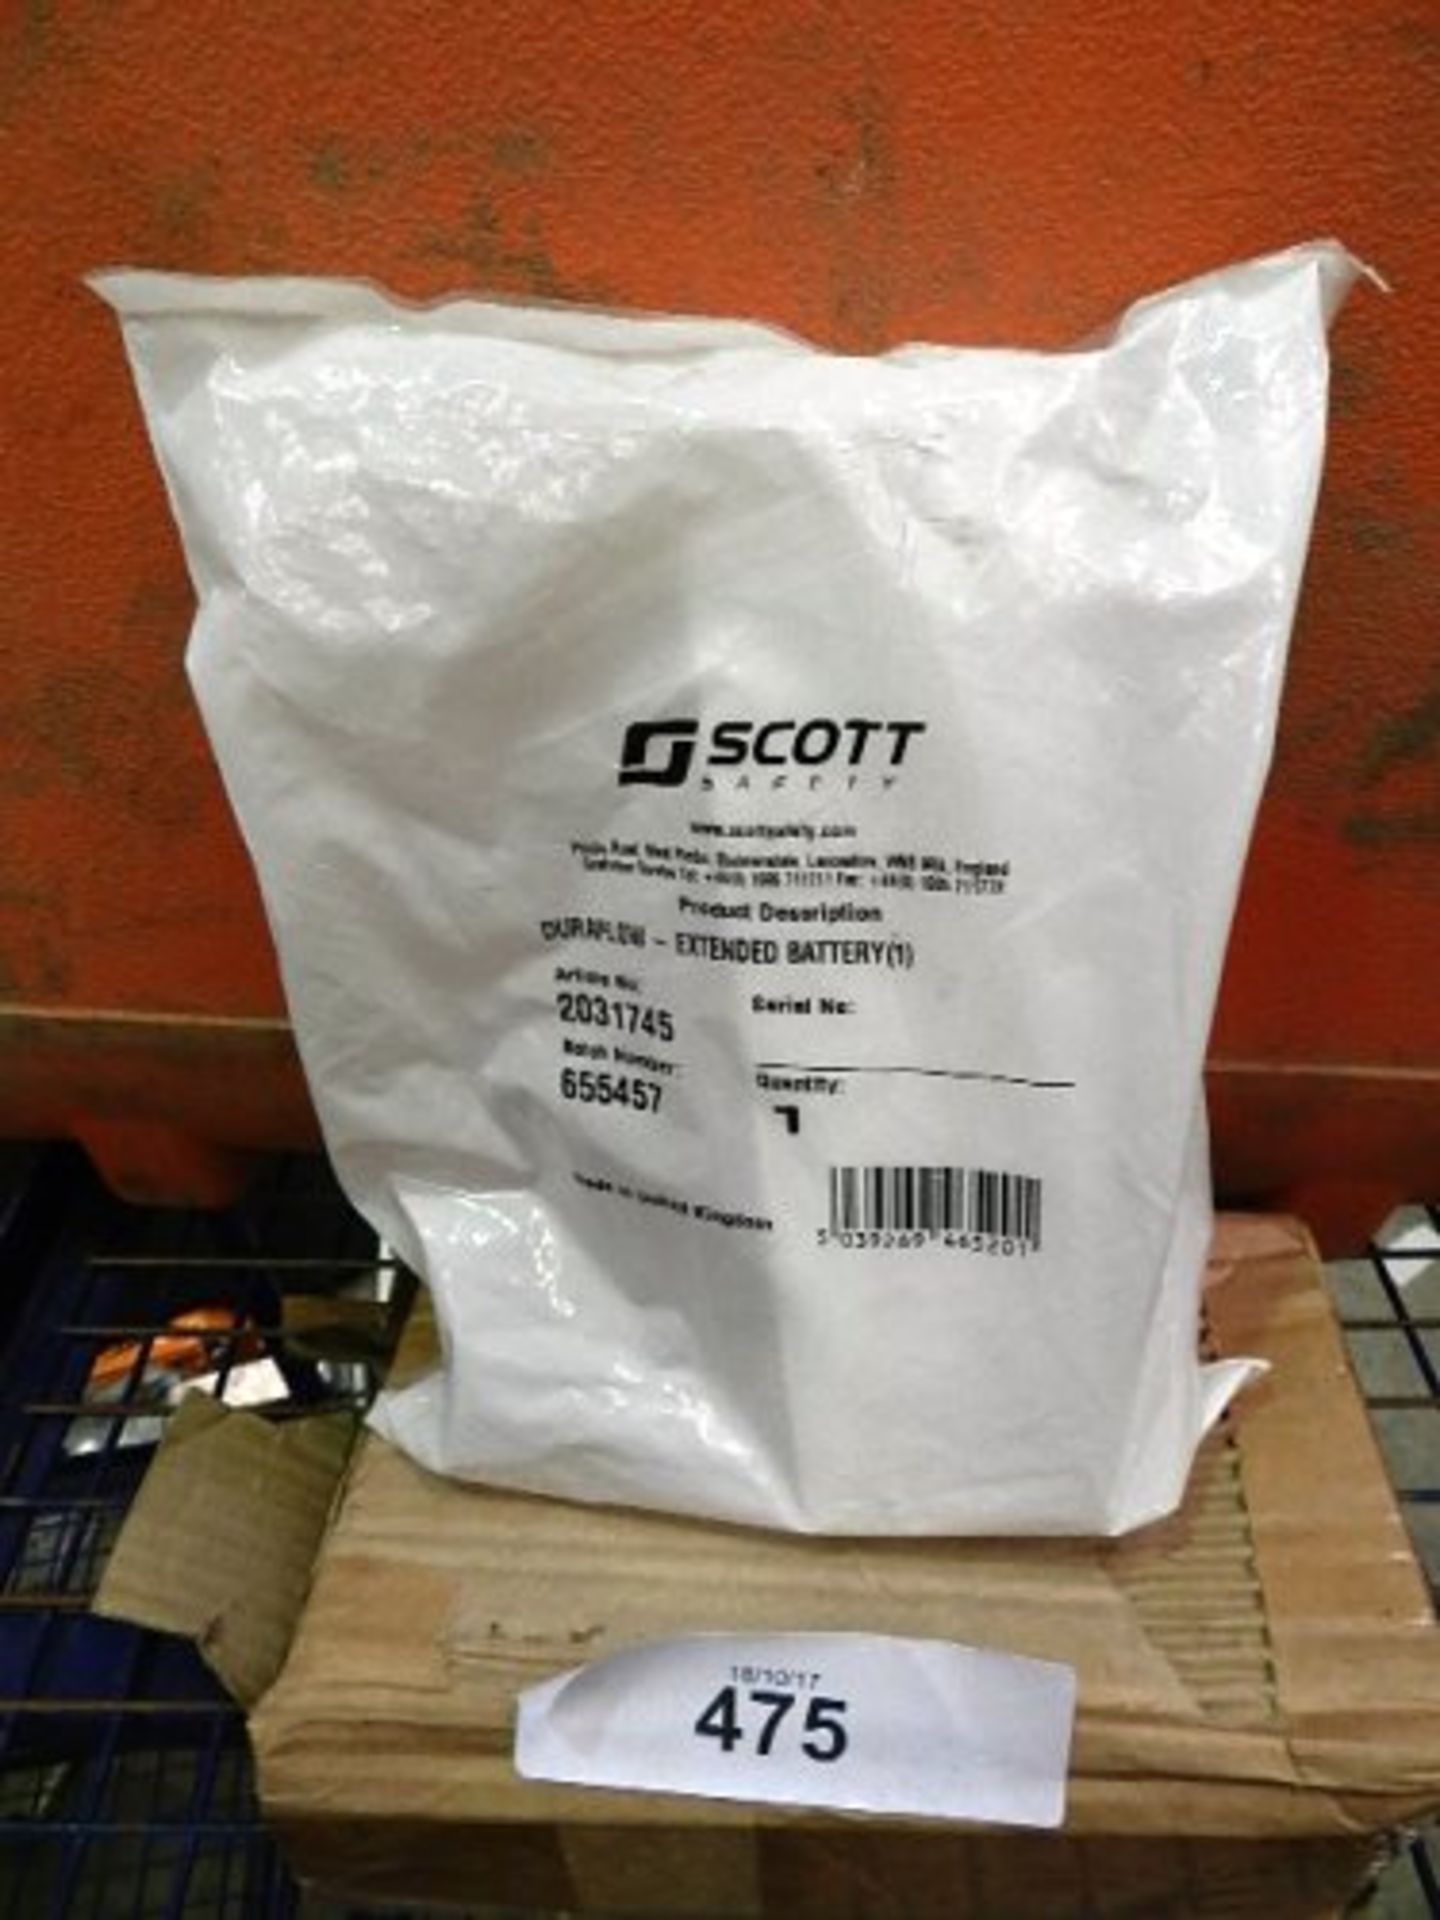 A Scott Safety duraflow extended battery. Article number 2031745 - New in pack (TC3)